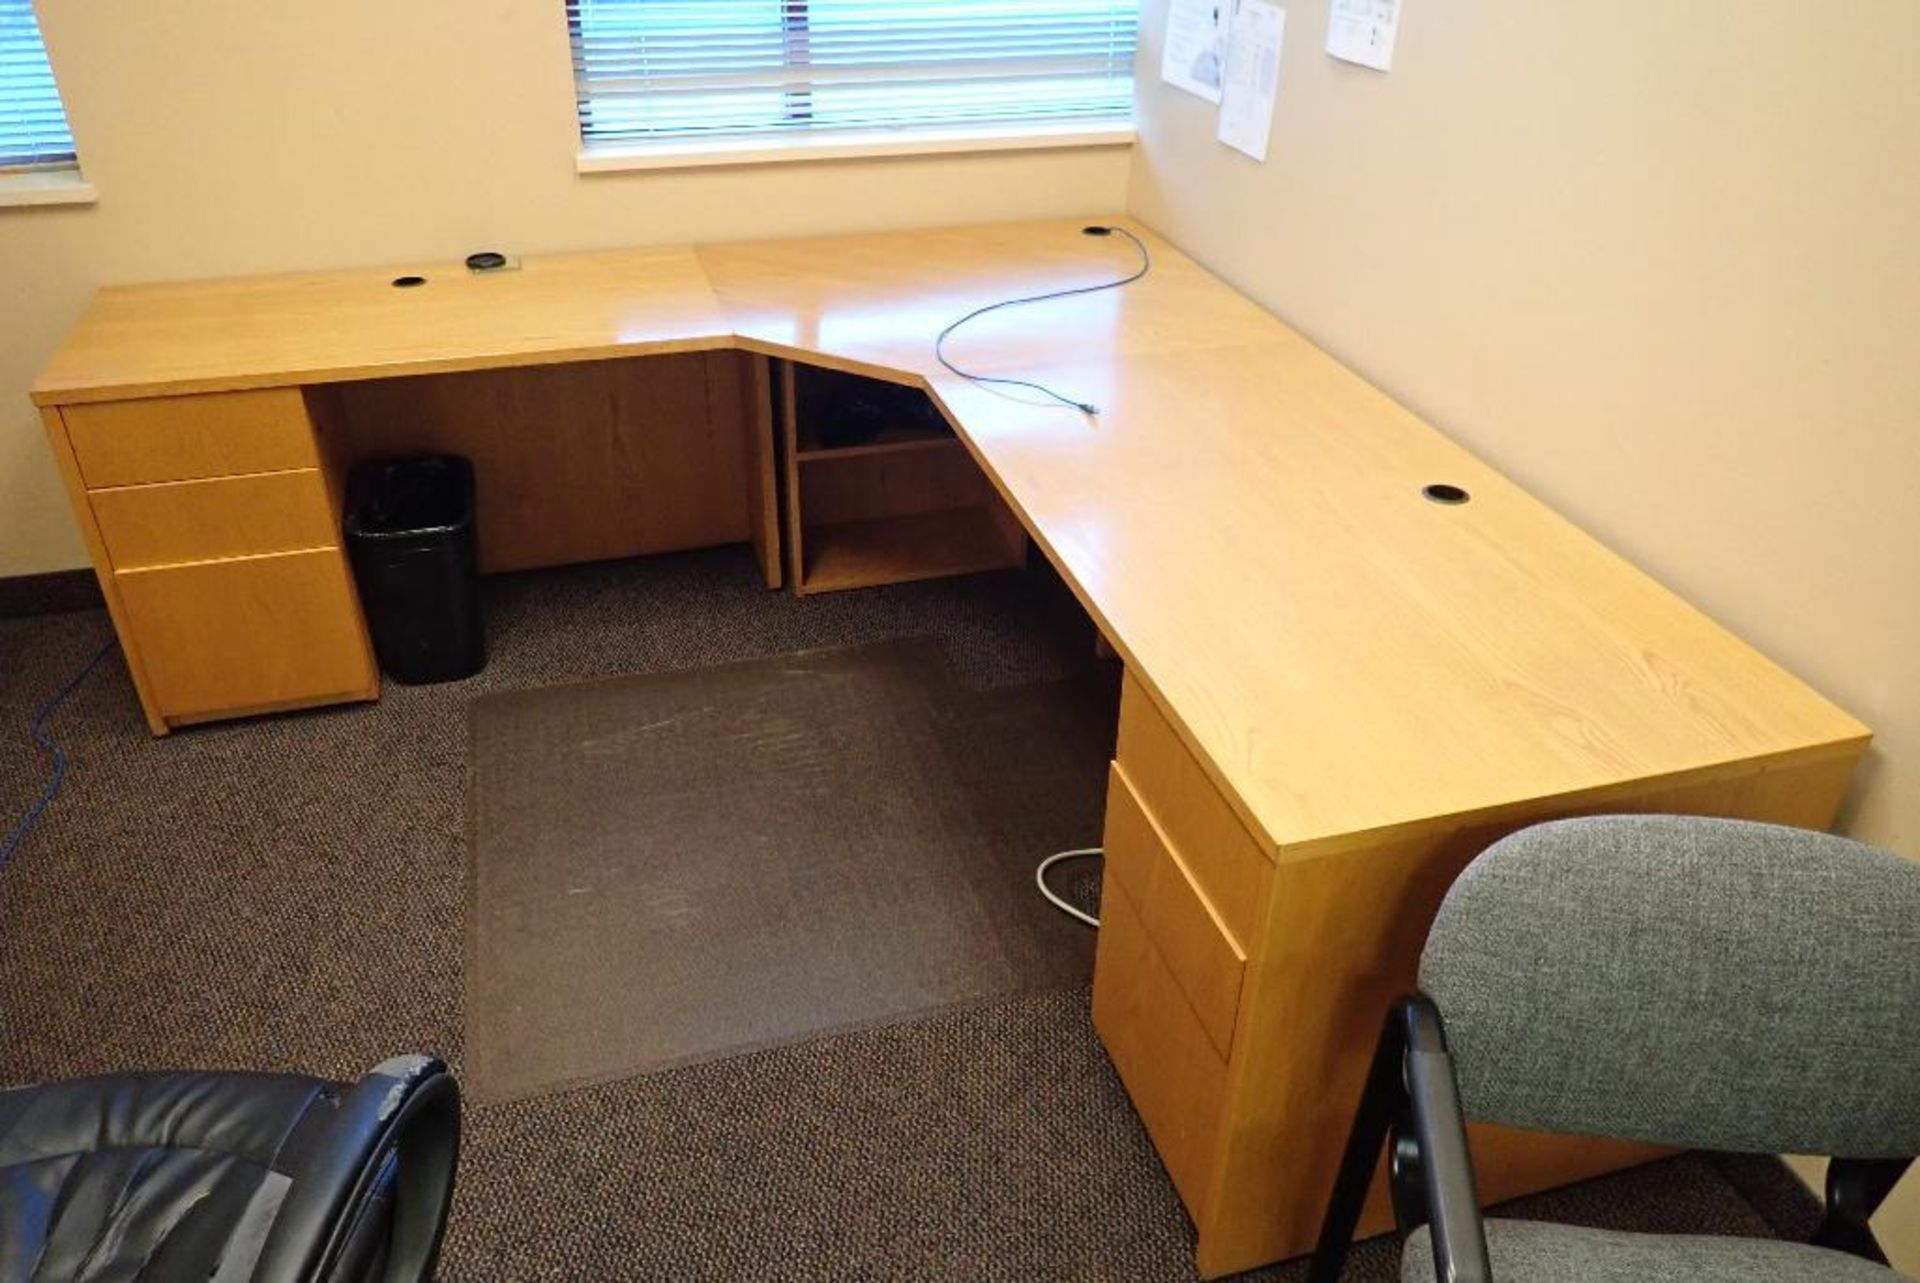 Contents of office, desk, chairs, map. **Rigging Fee: $100** (Located in Delta, BC Canada.) - Image 2 of 2